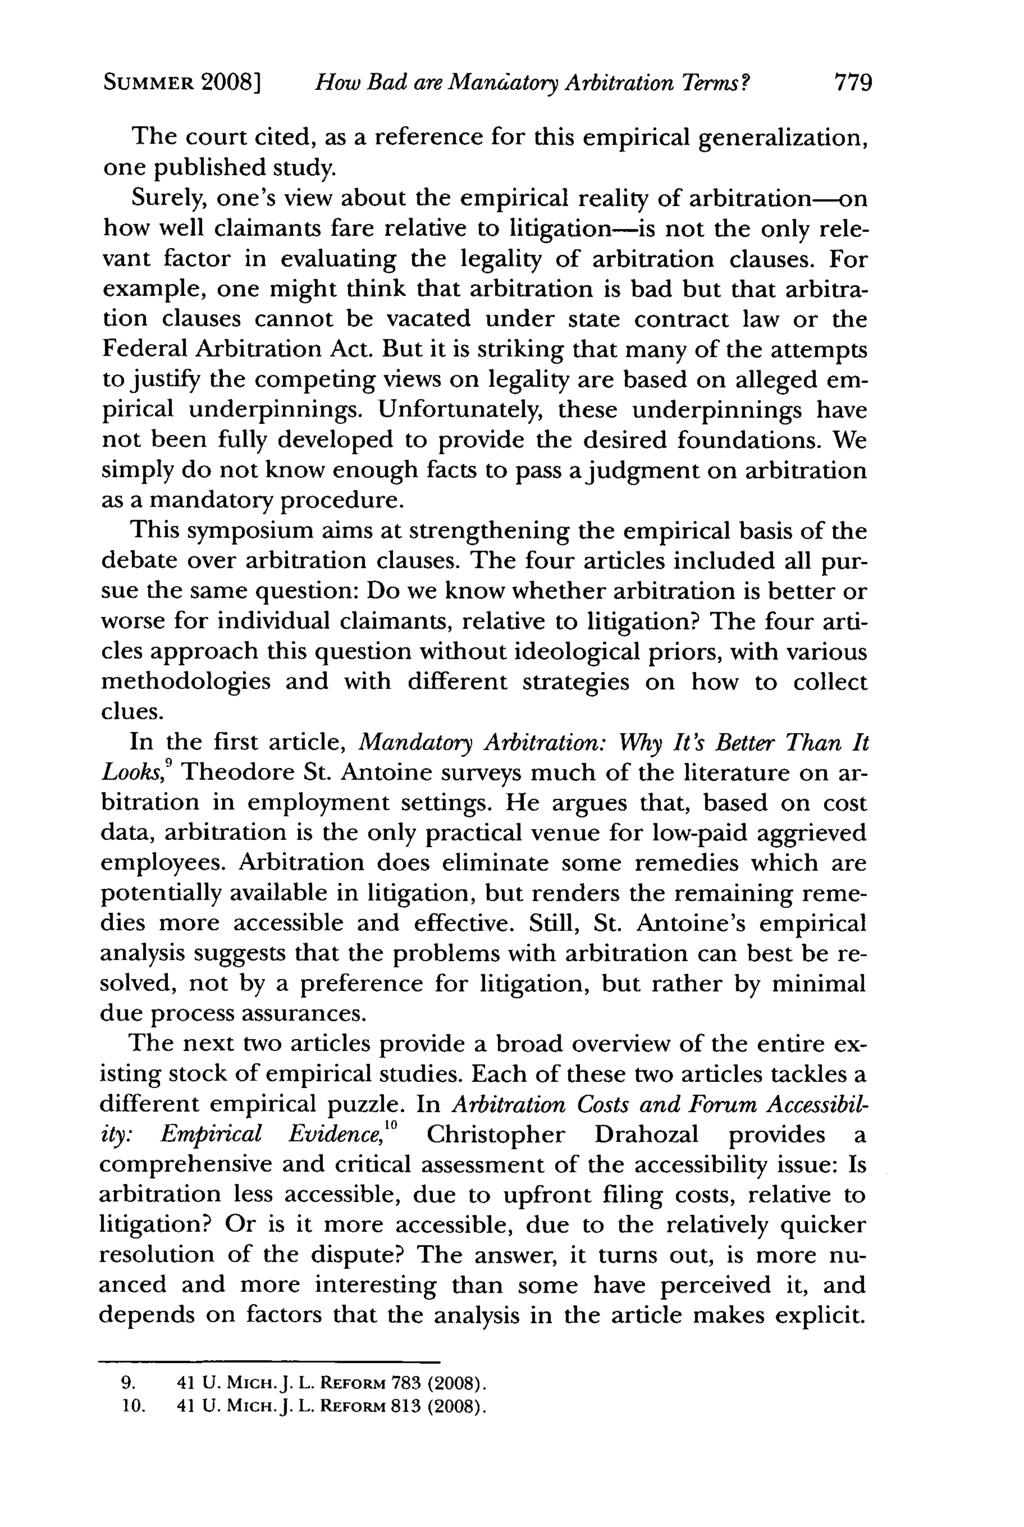 SUMMER 2008] How Bad are Mandatory Arbitration Terms? The court cited, as a reference for this empirical generalization, one published study.